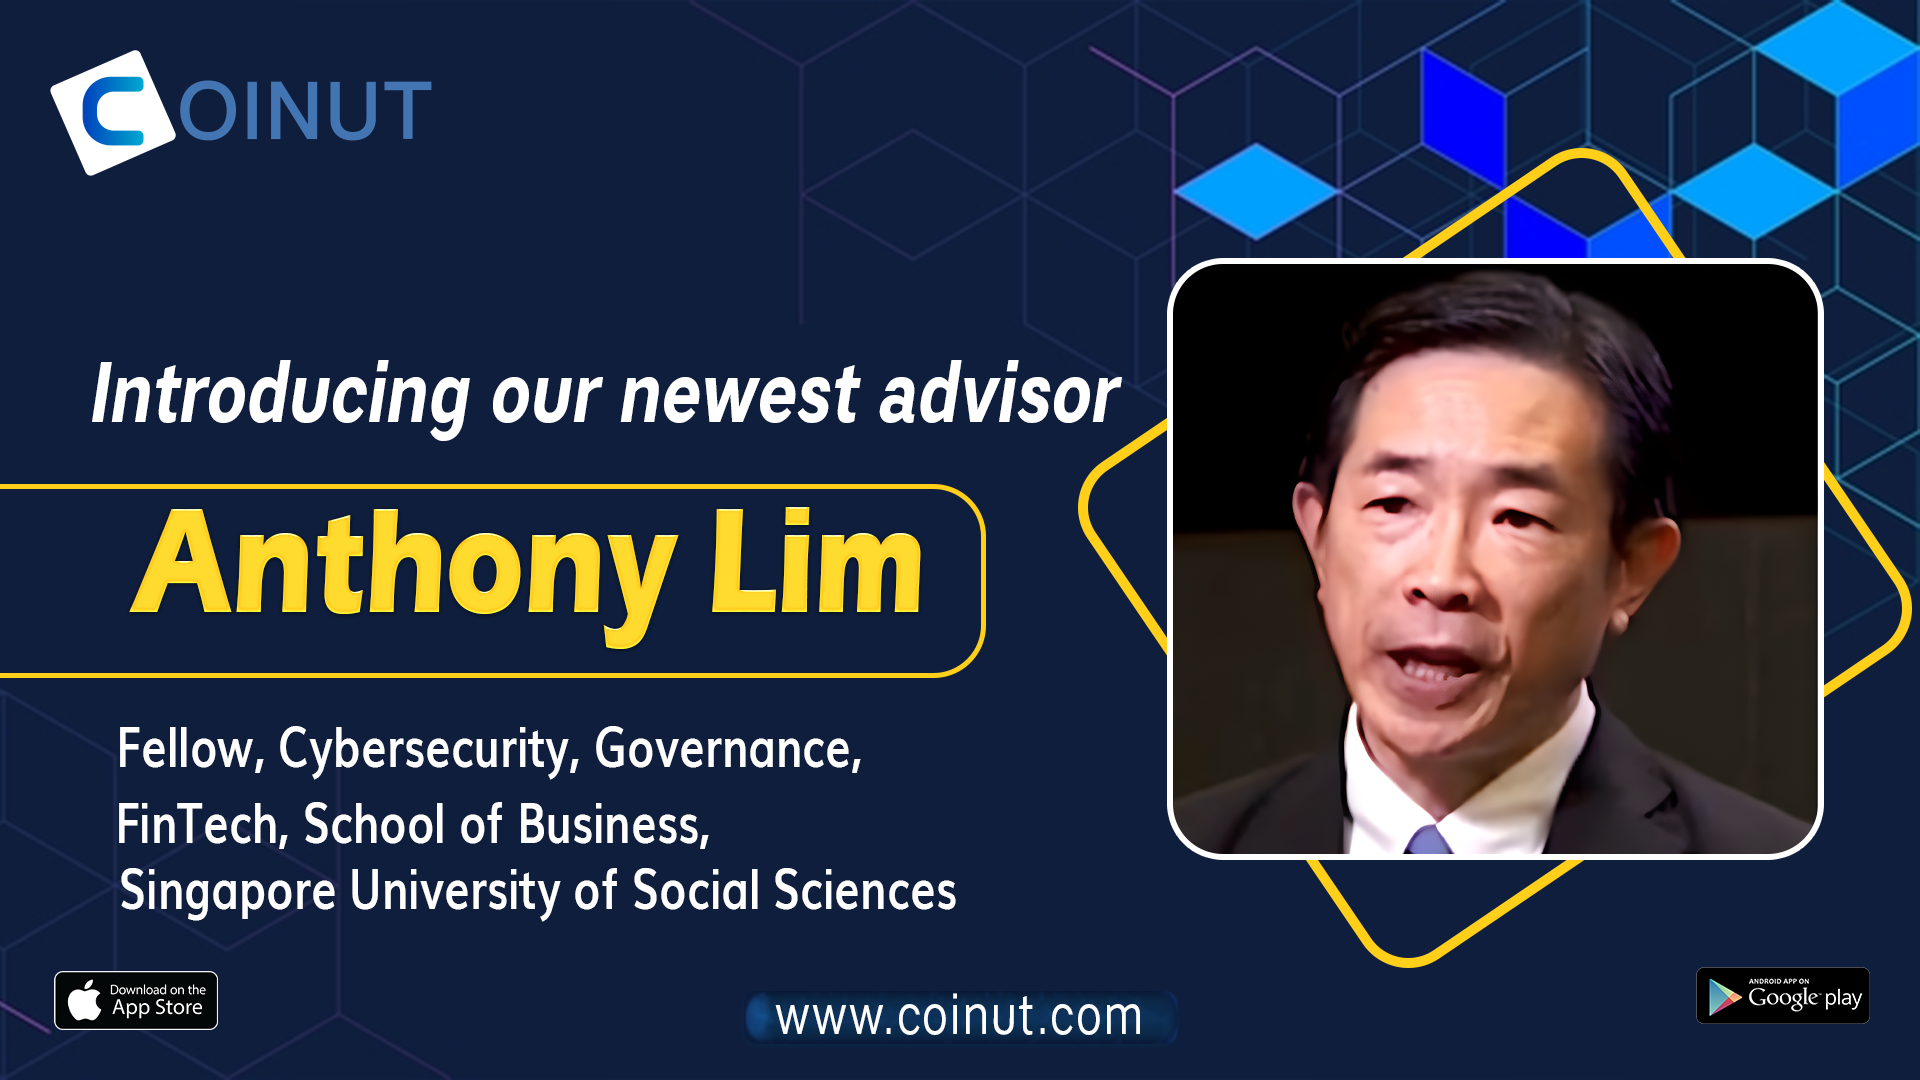 Coinut introduces Anthony Lim, Fellow, SUSS, as the newest advisor